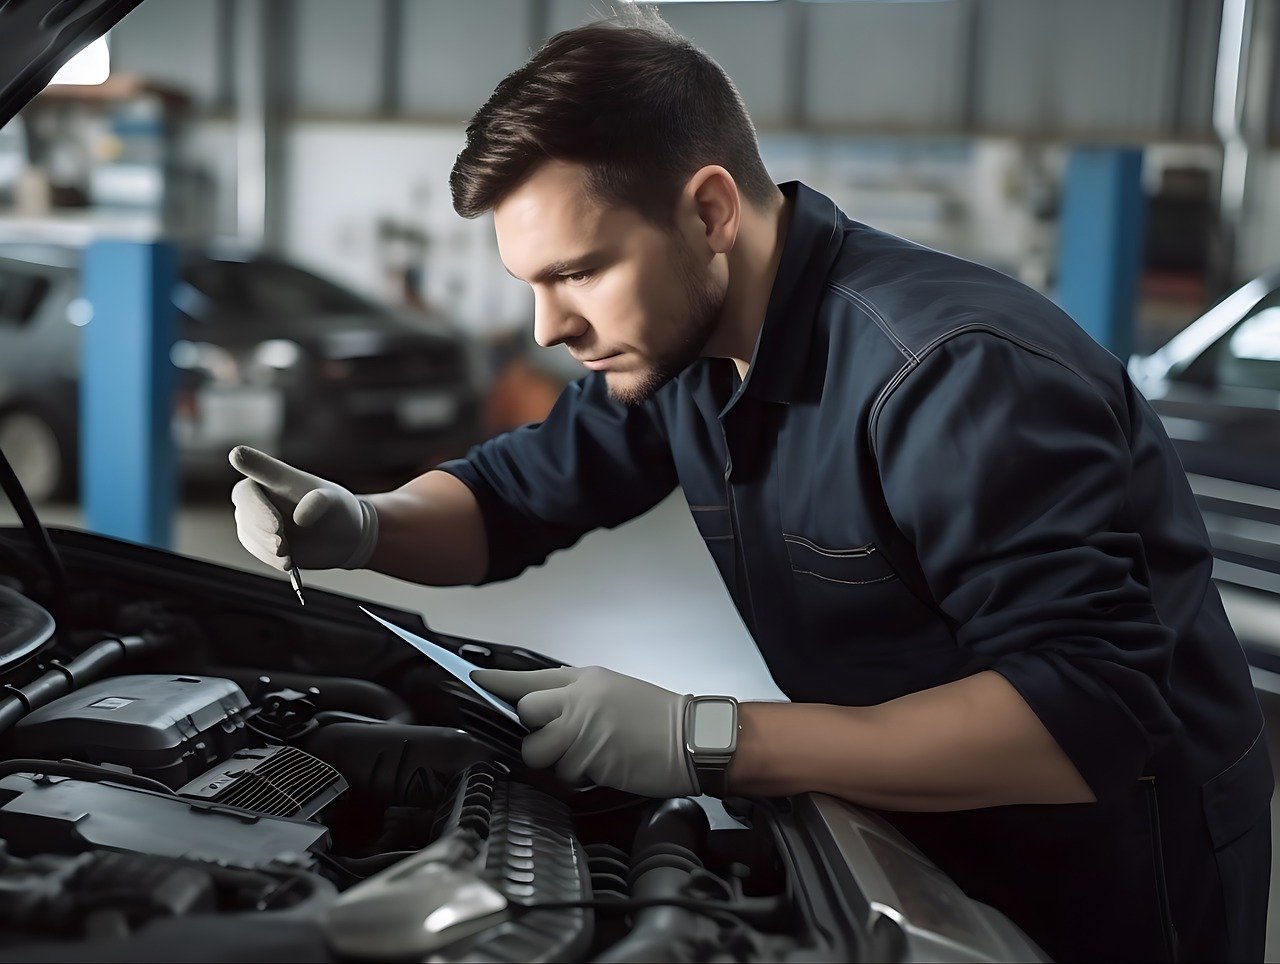 Aftermarket facing labour shortage, competition: Report